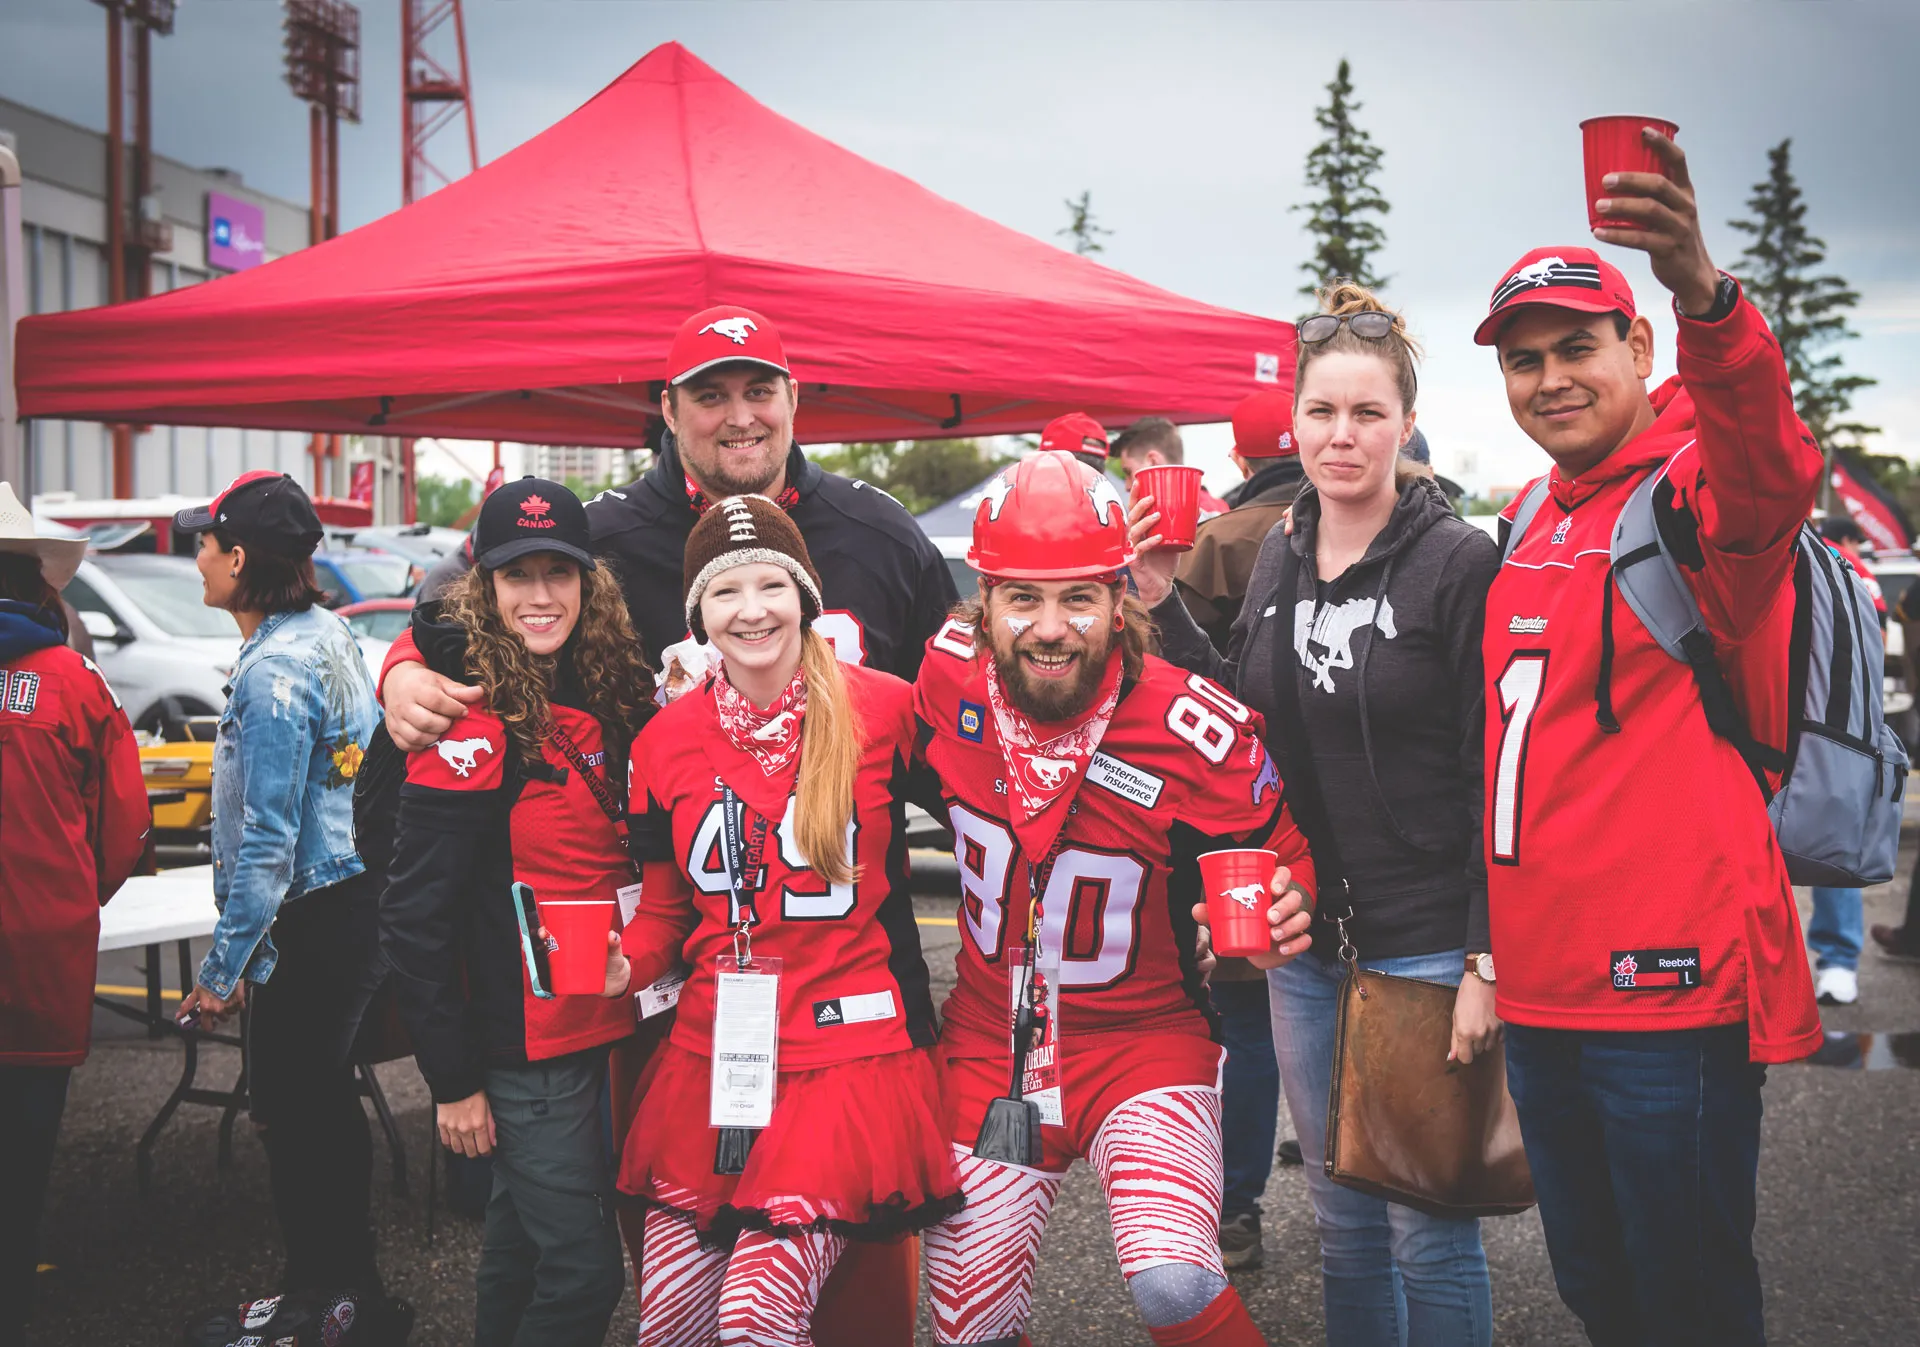 Celebrate your love of the game at the greatest tailgate experience in the CFL.